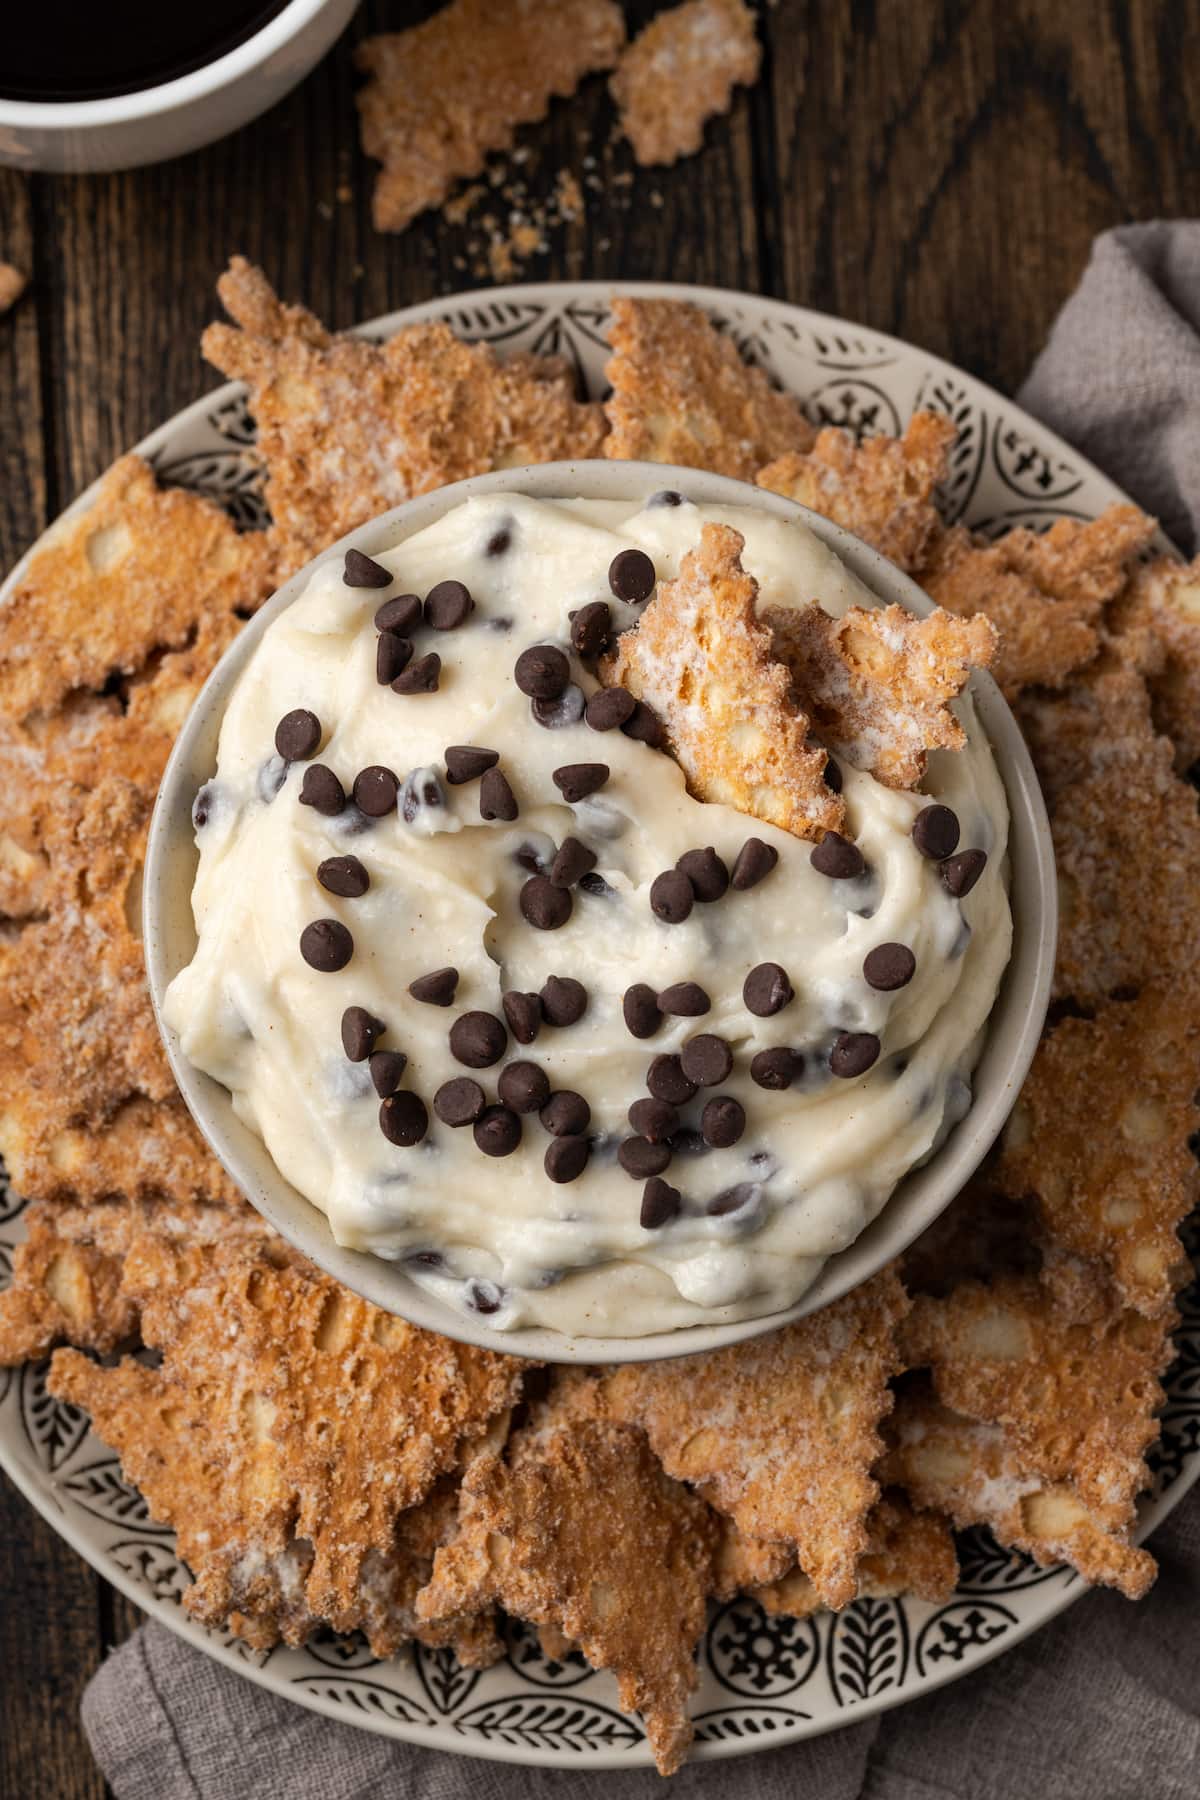 Overhead view of cannoli dip served in a bowl, surrounded by cookies on a plate.